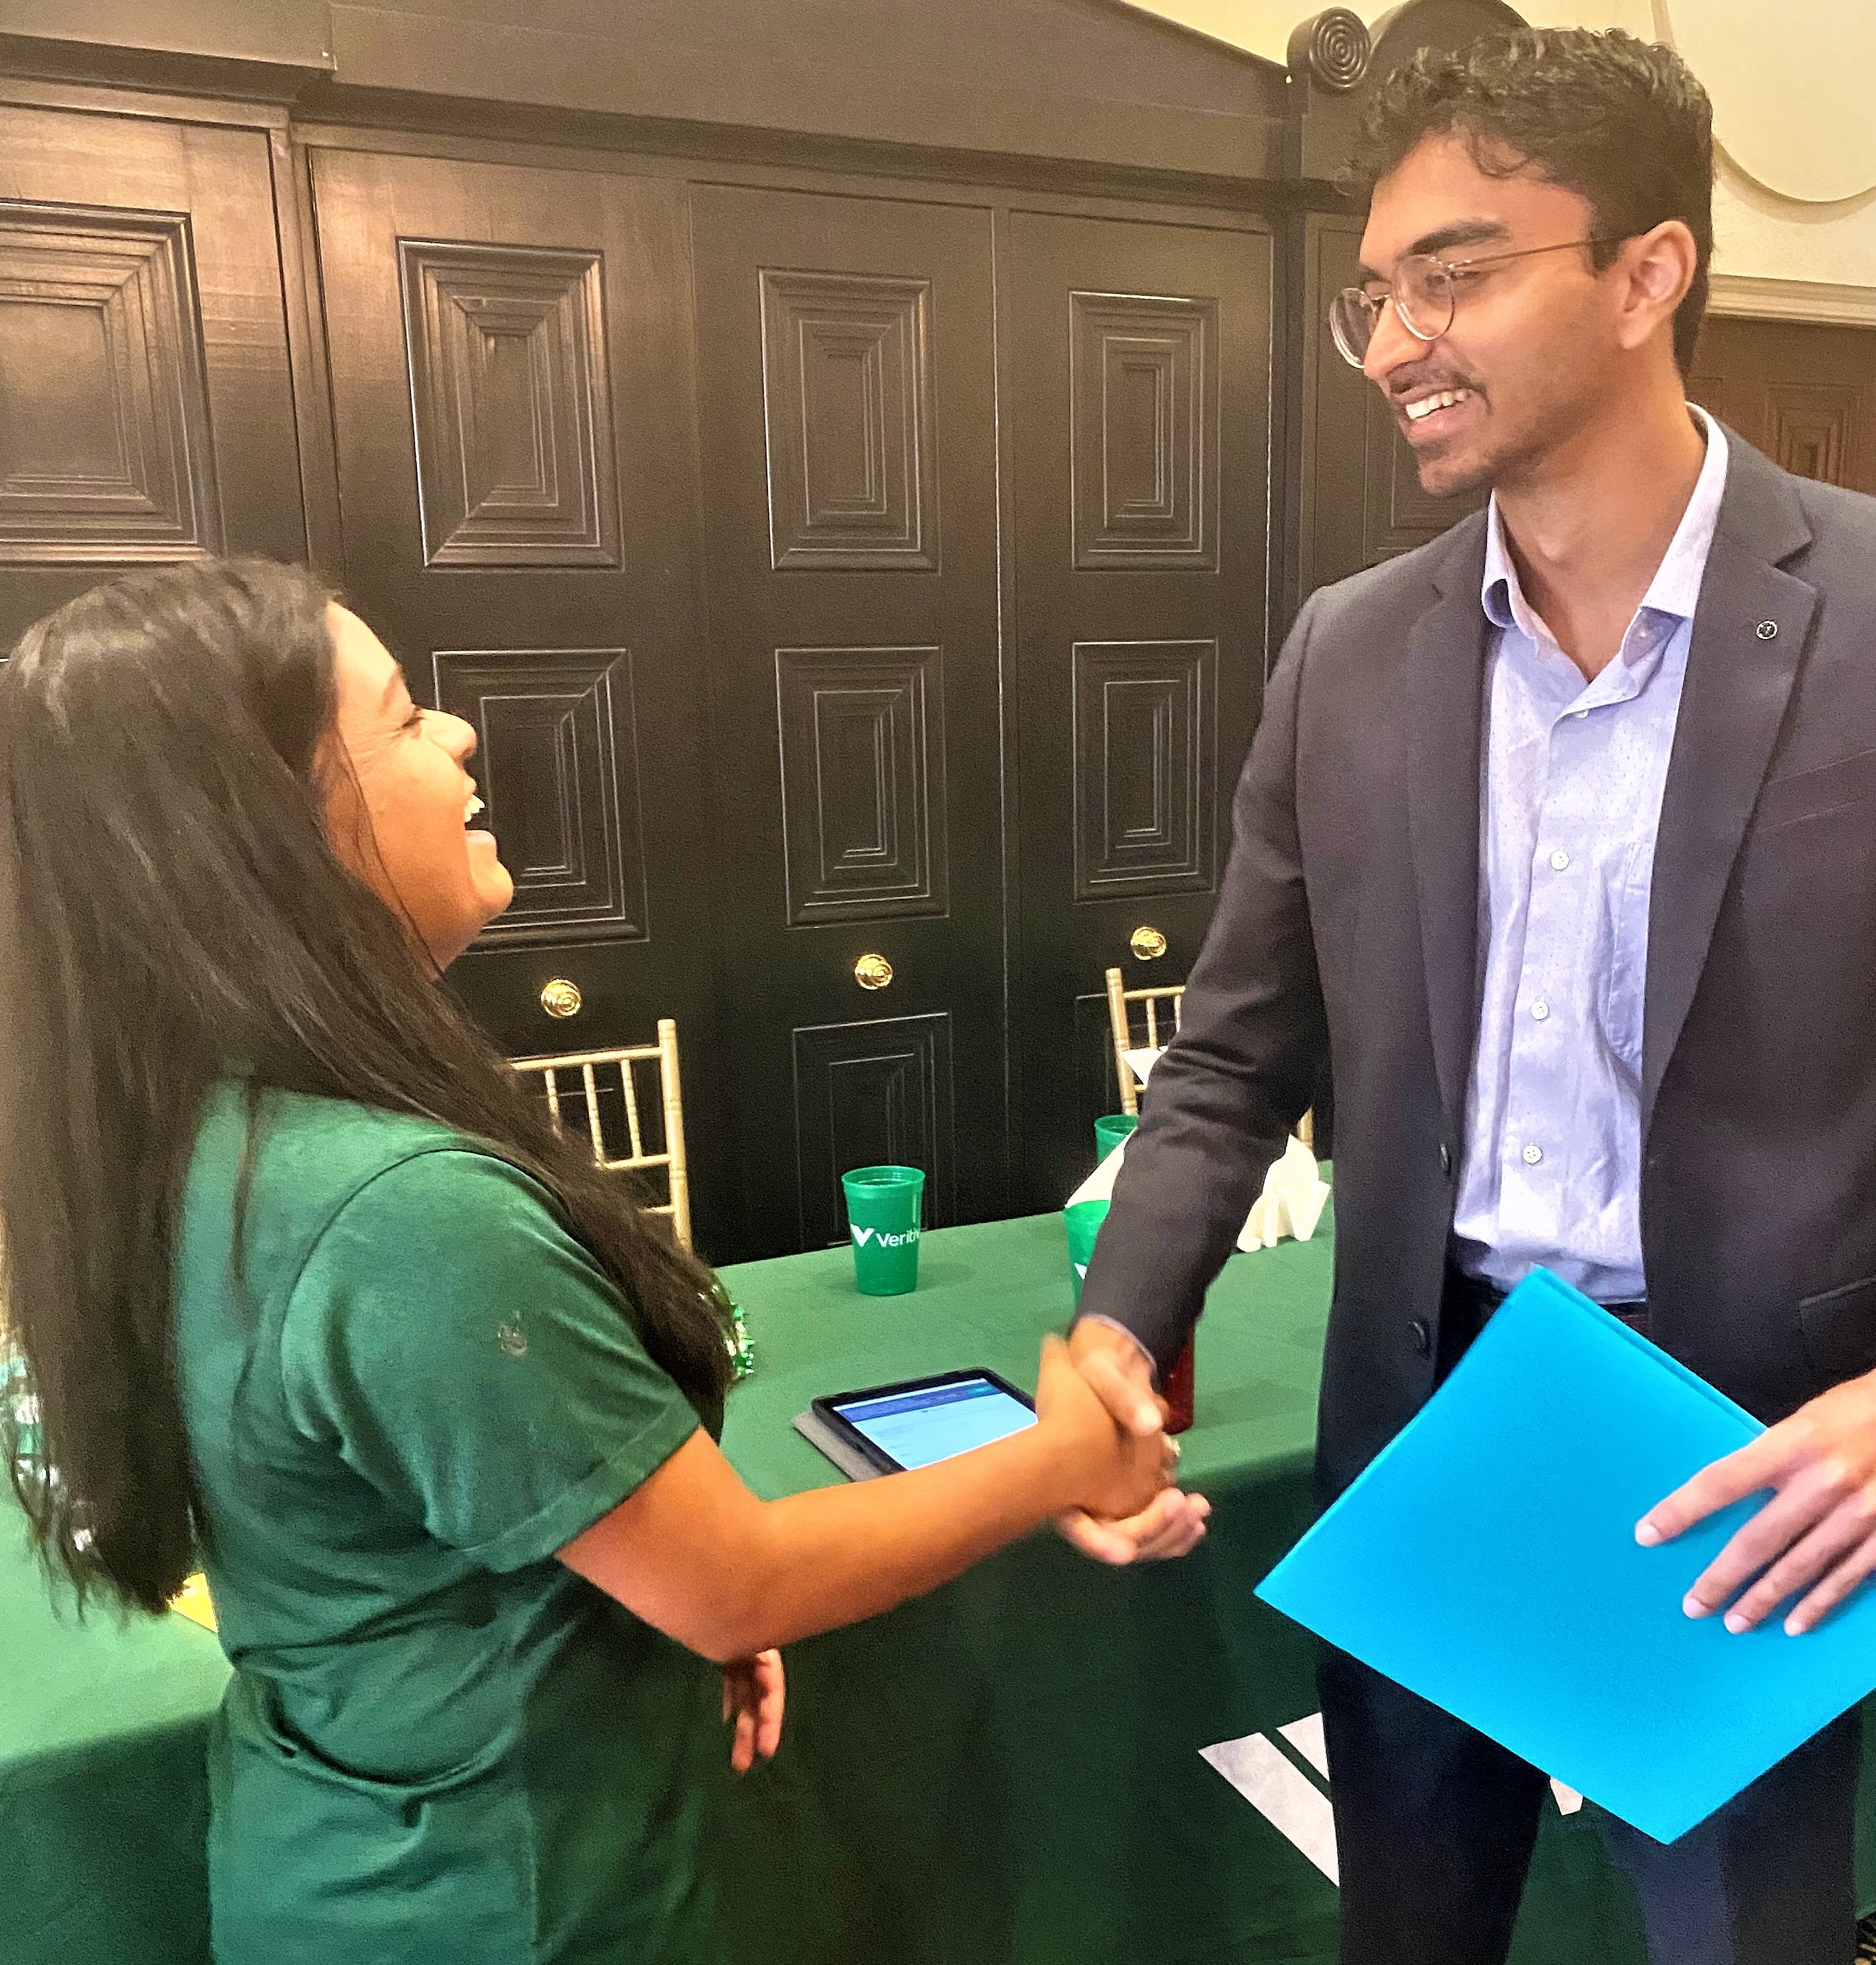 Veritiv's Shreya Patel discusses job opportunities with one of the 150 Georgia Tech students who attended the career fair.